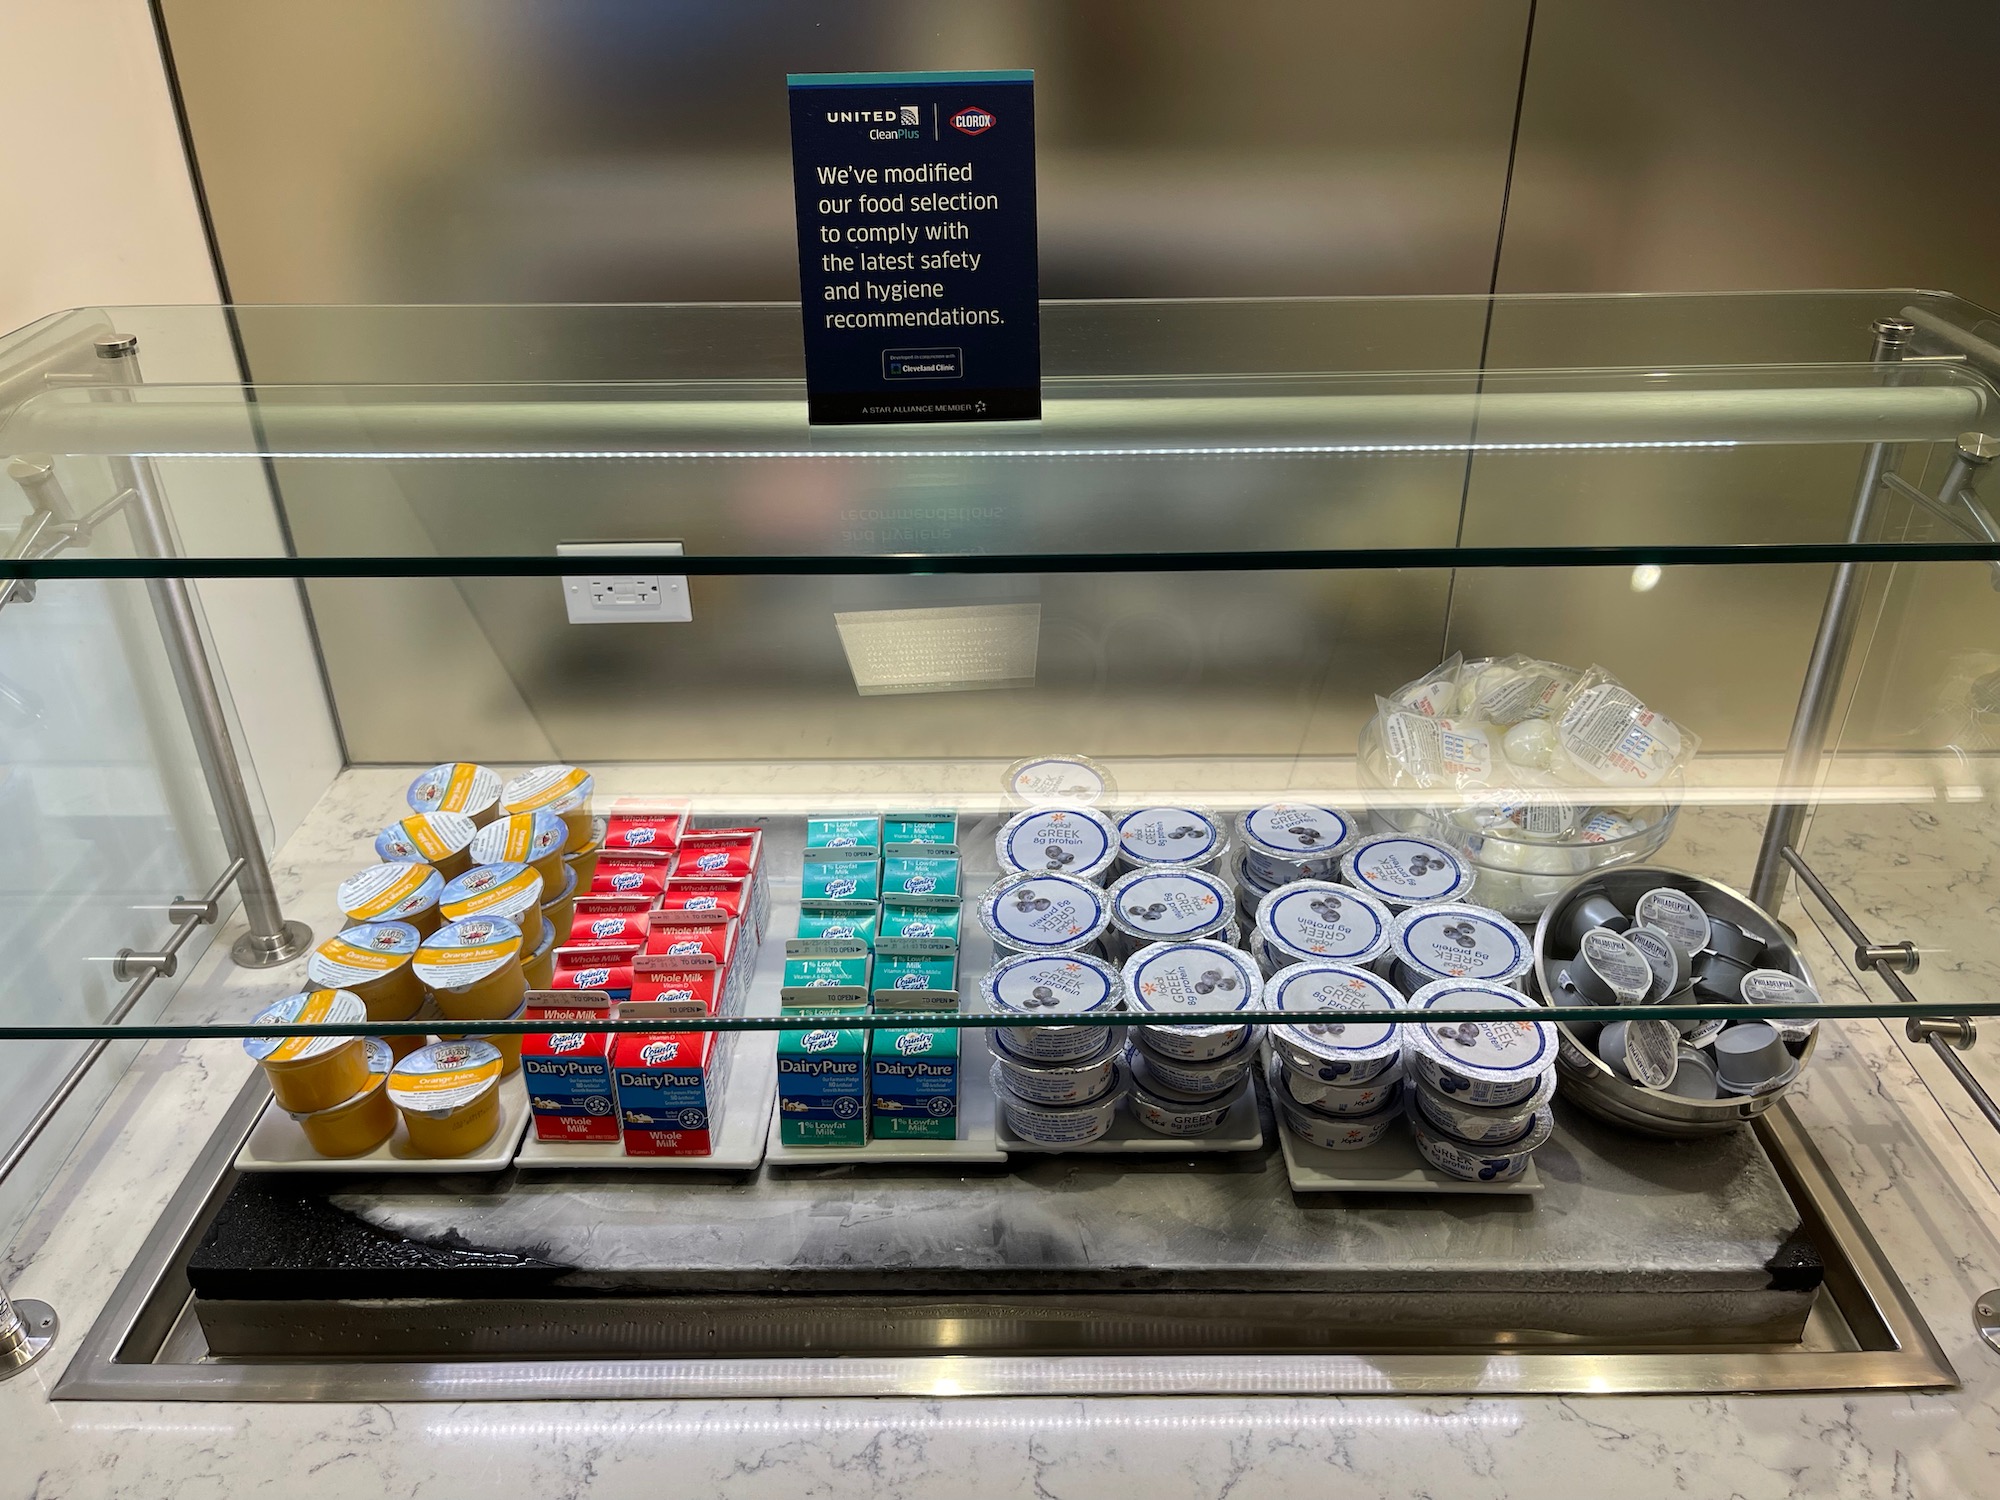 a display case with different types of yogurt and other food items